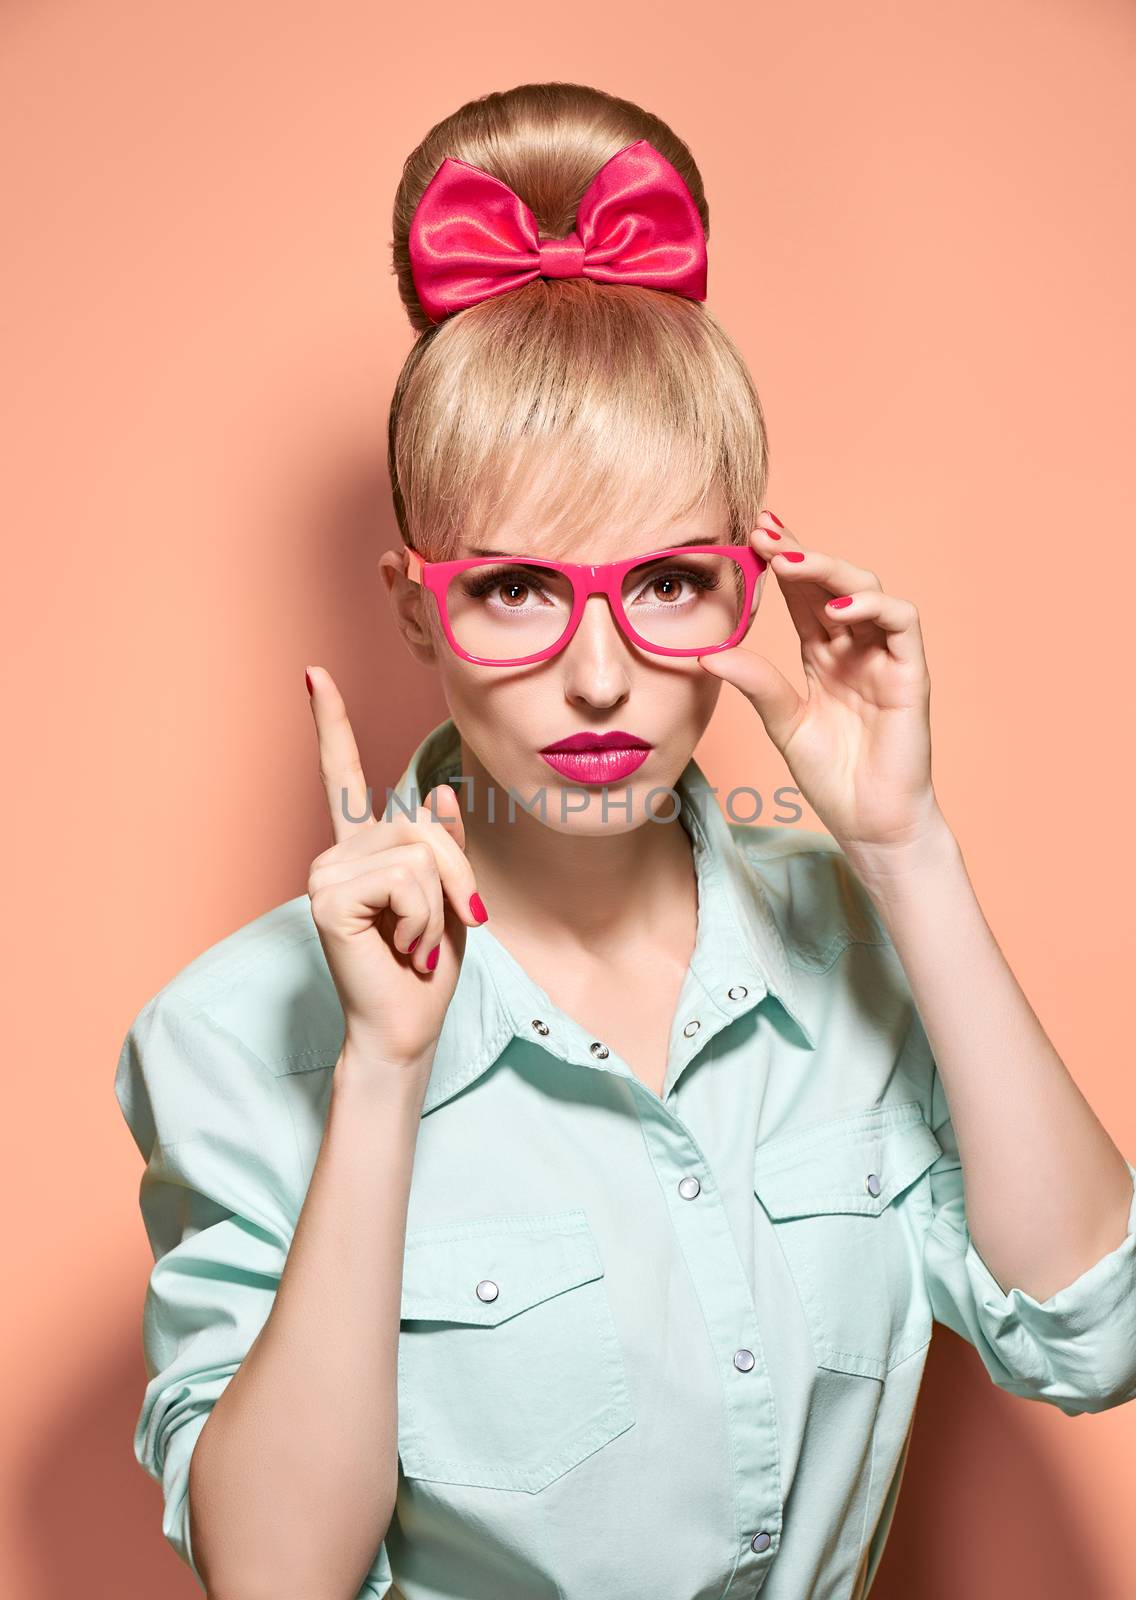 Beauty fashion nerdy woman in stylish glasses thinking, idea. Attractive pretty funny blonde girl smiling. Confidence, success, Pinup hairstyle bow makeup. Unusual playful, expression.Vintage, on pink